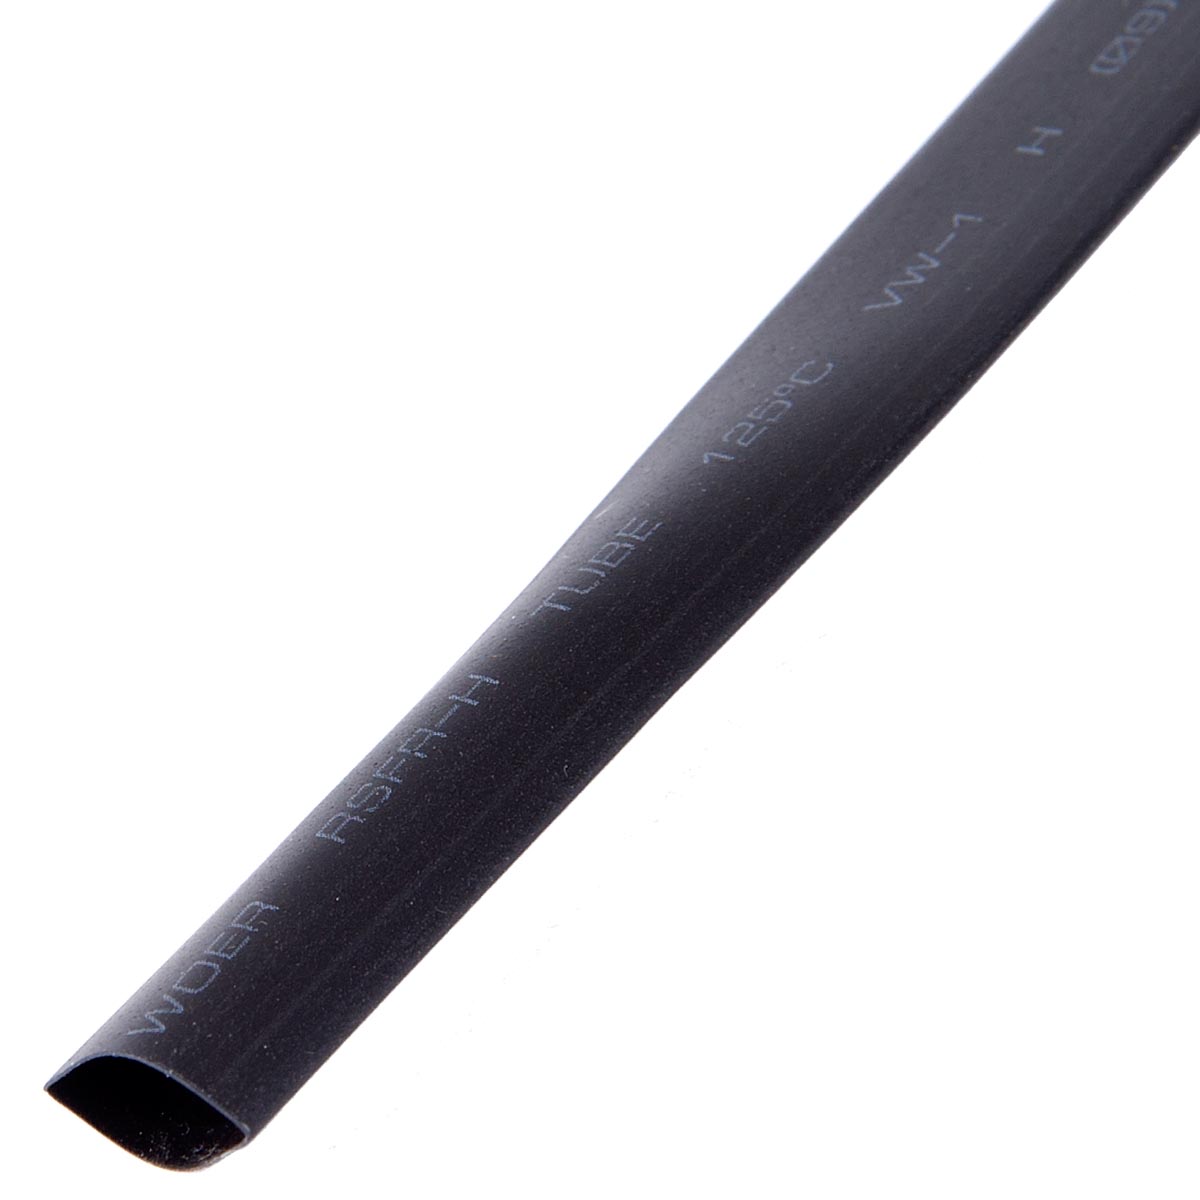 Heat Shrink Electrical Insulation Tubing - 3/8" dia., Per Foot